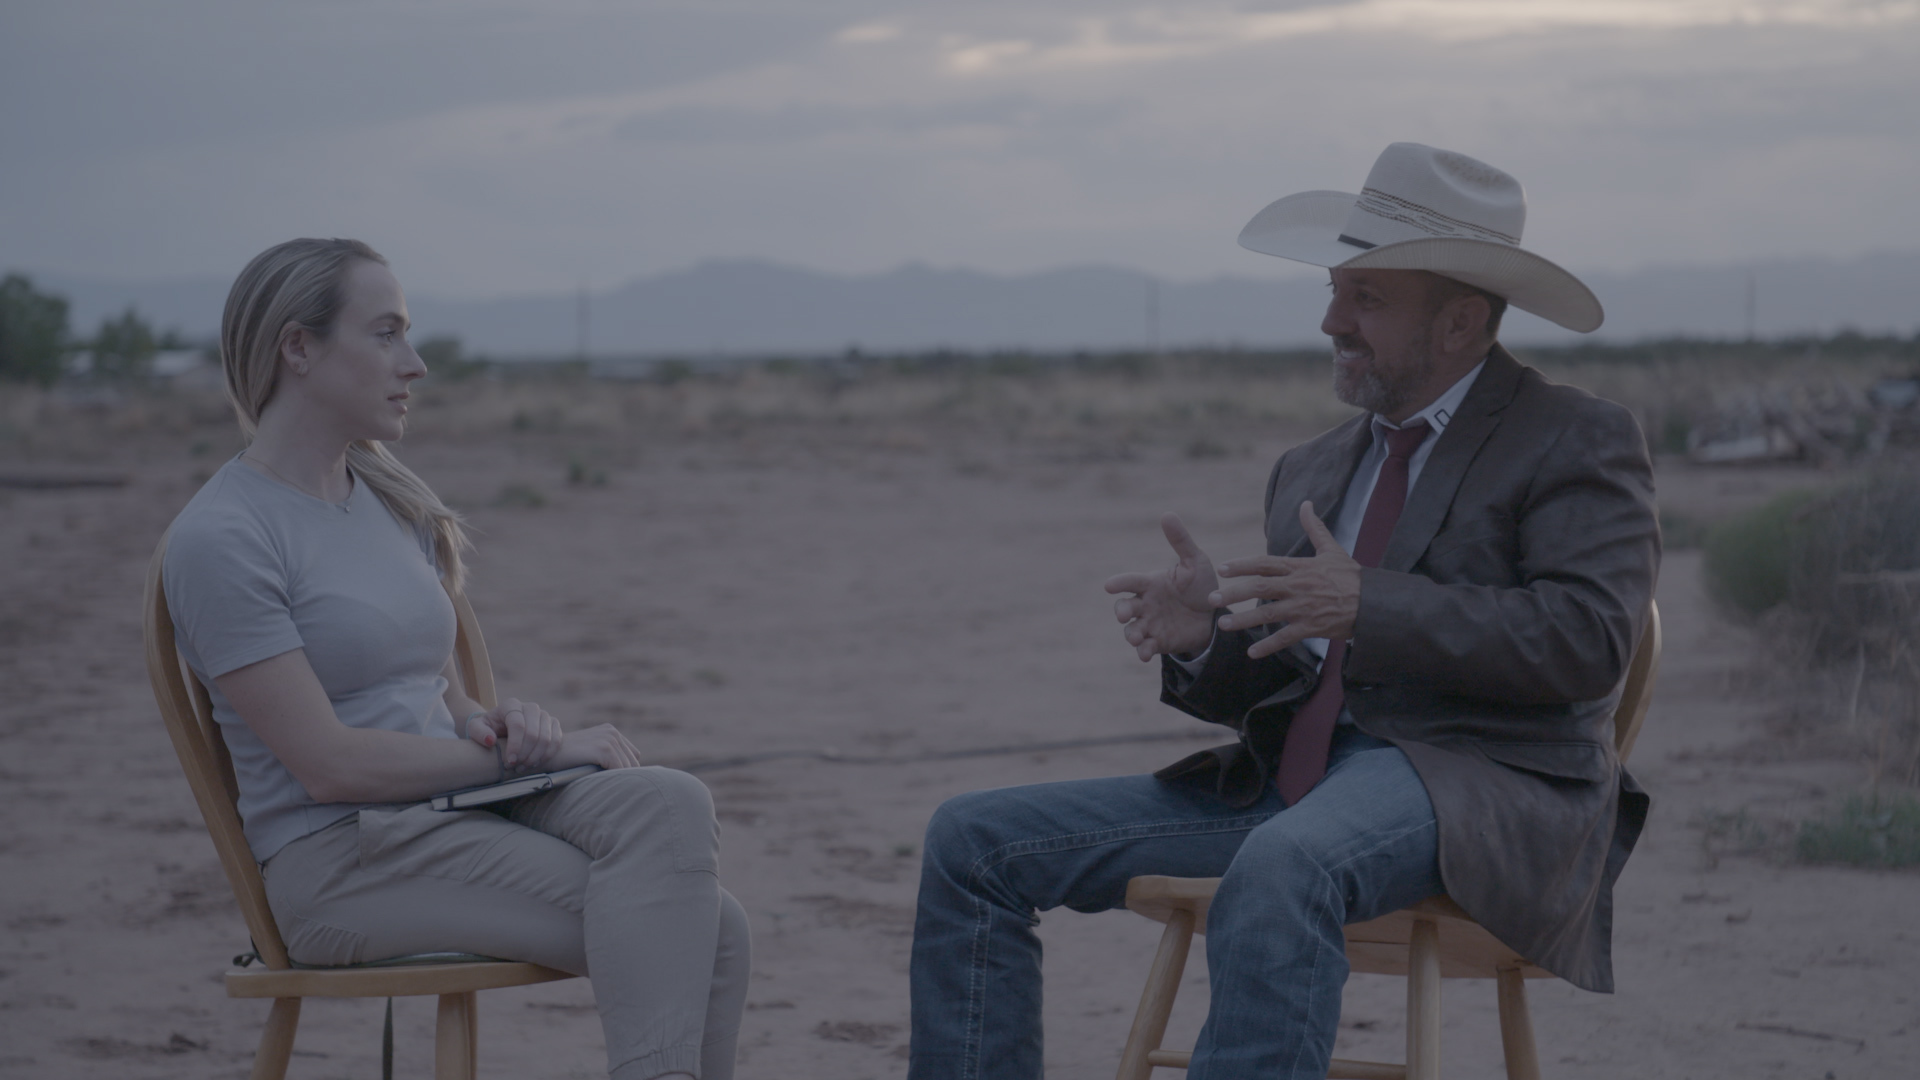 VICE News' Liz Landers interviews Couy Griffin in Otero County (VICE News)